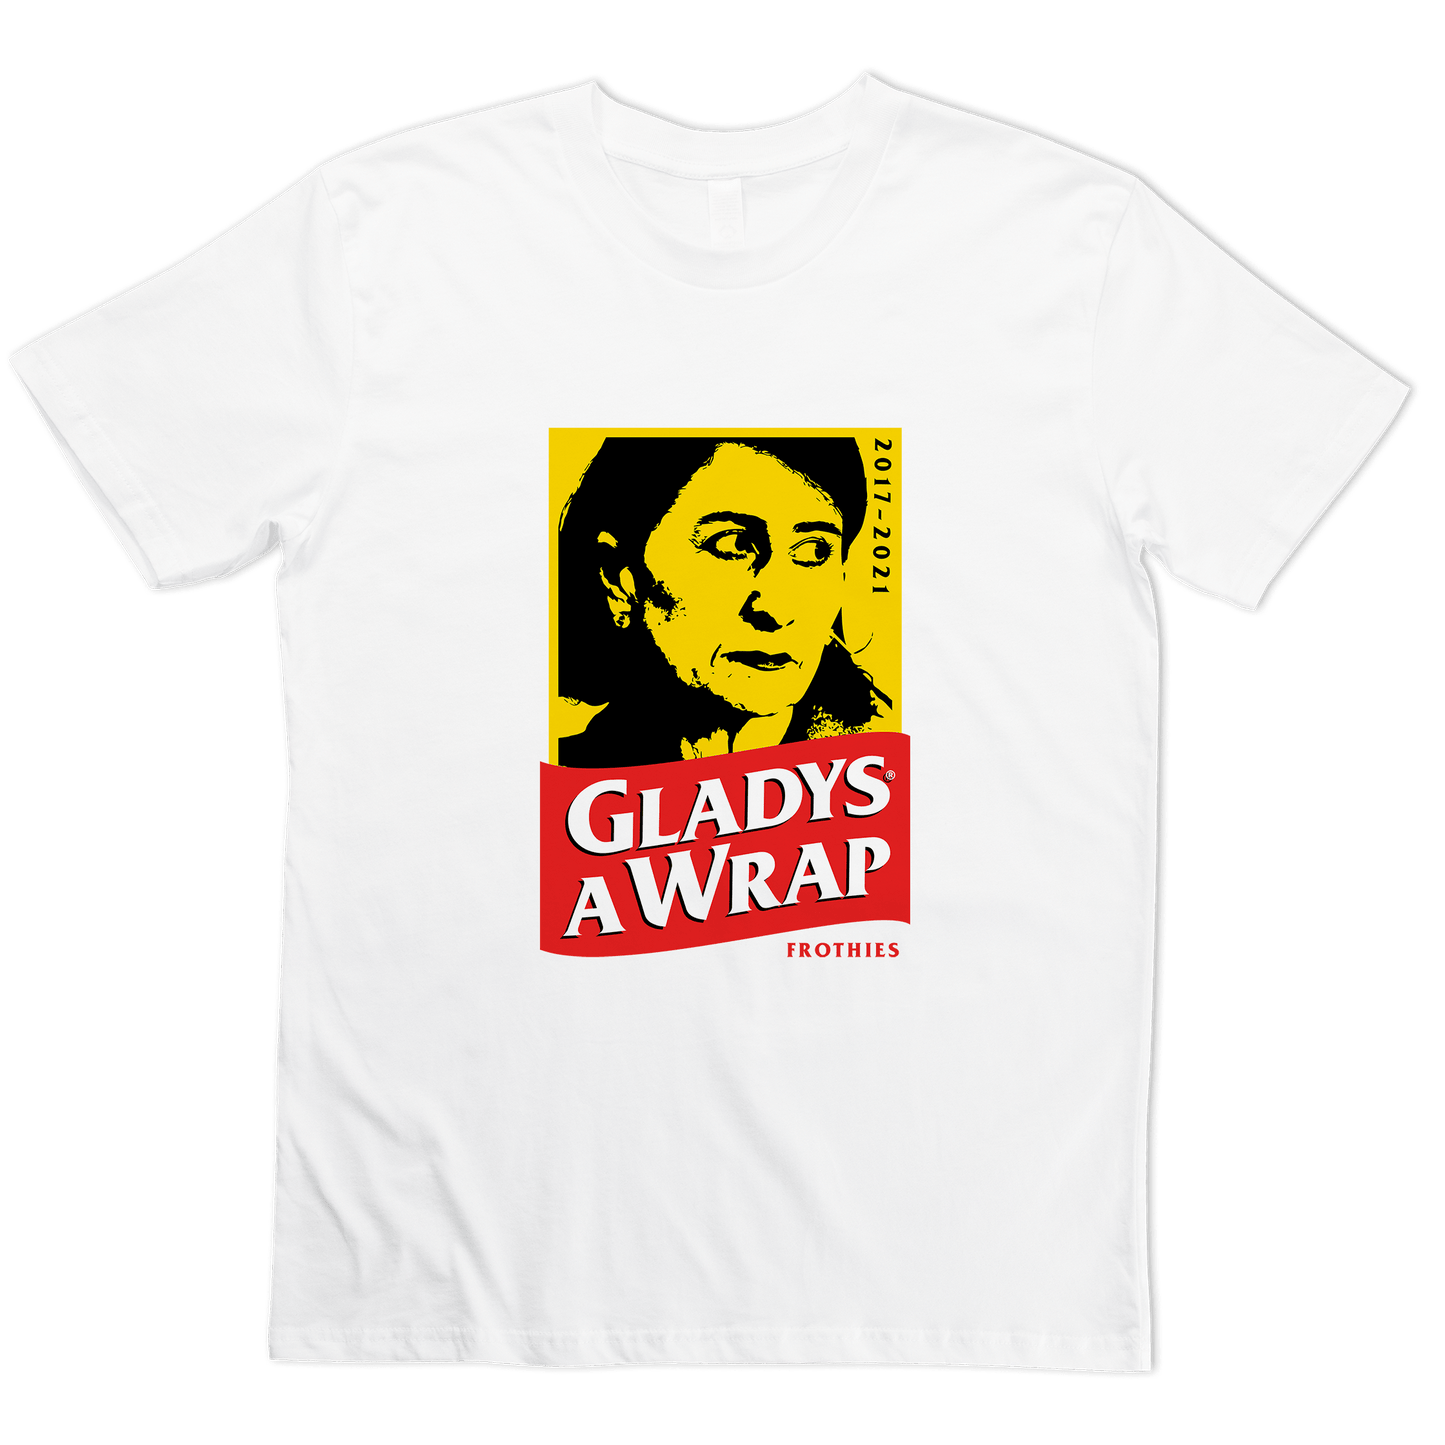 Gladys A Wrap Tee Clothing Frothies